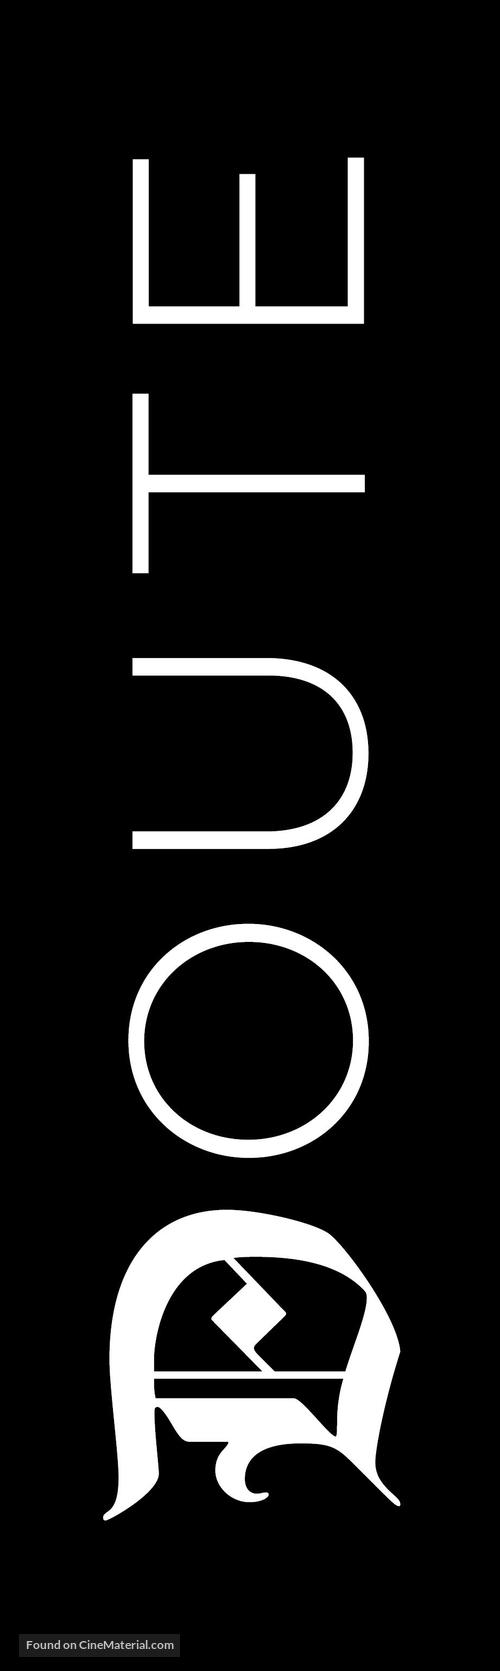 Doubt - French Logo